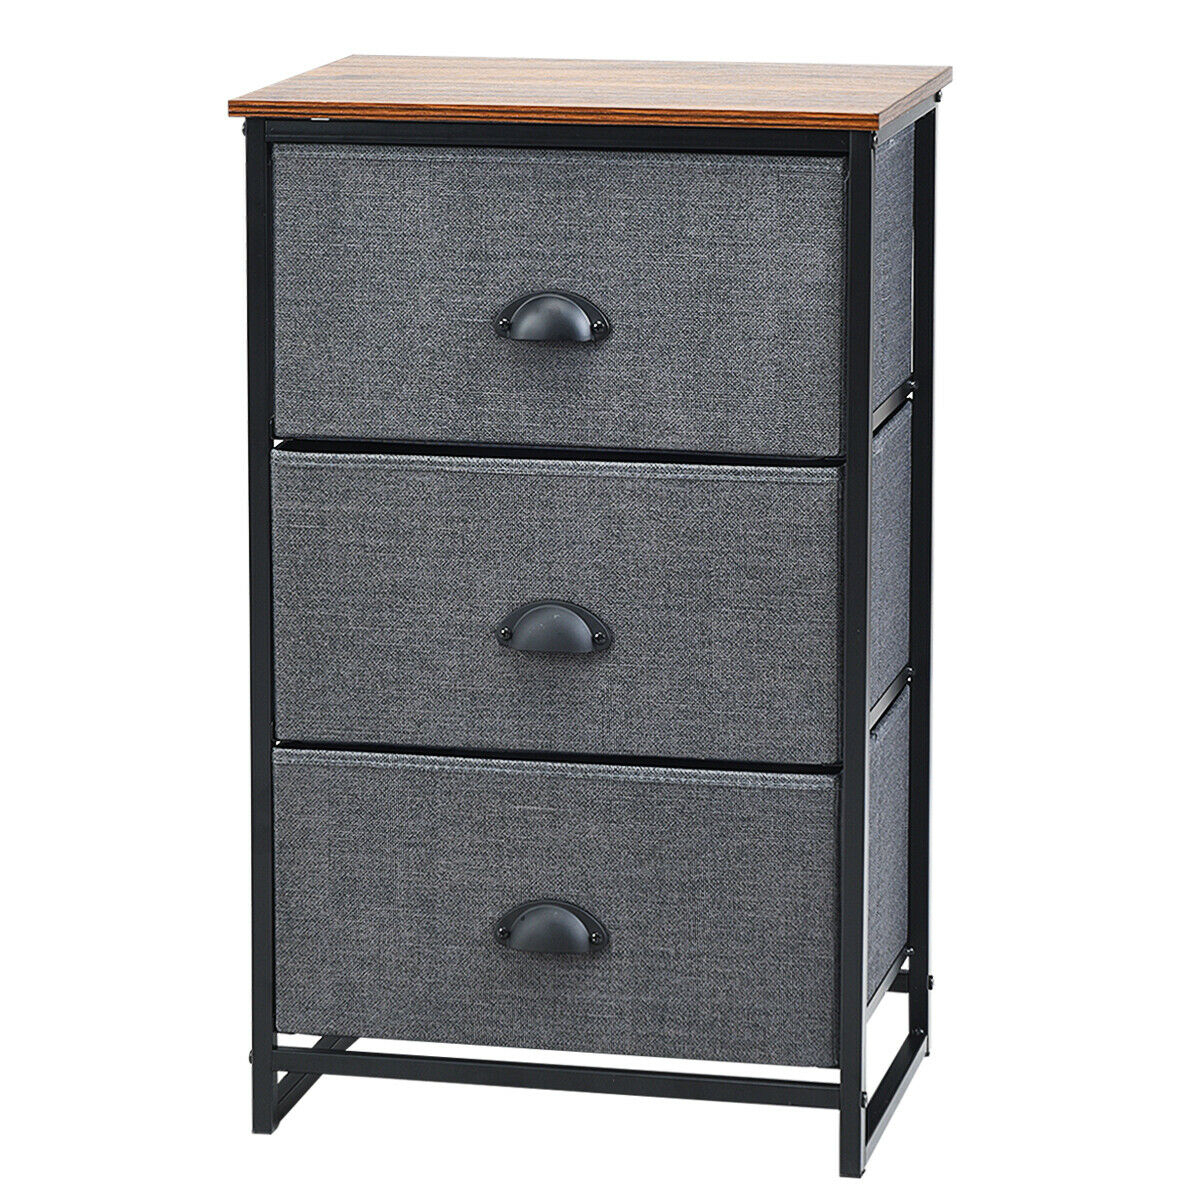 3 Drawer Nightstand Side Table Storage Tower Dresser Chest Home Office Furniture - Black